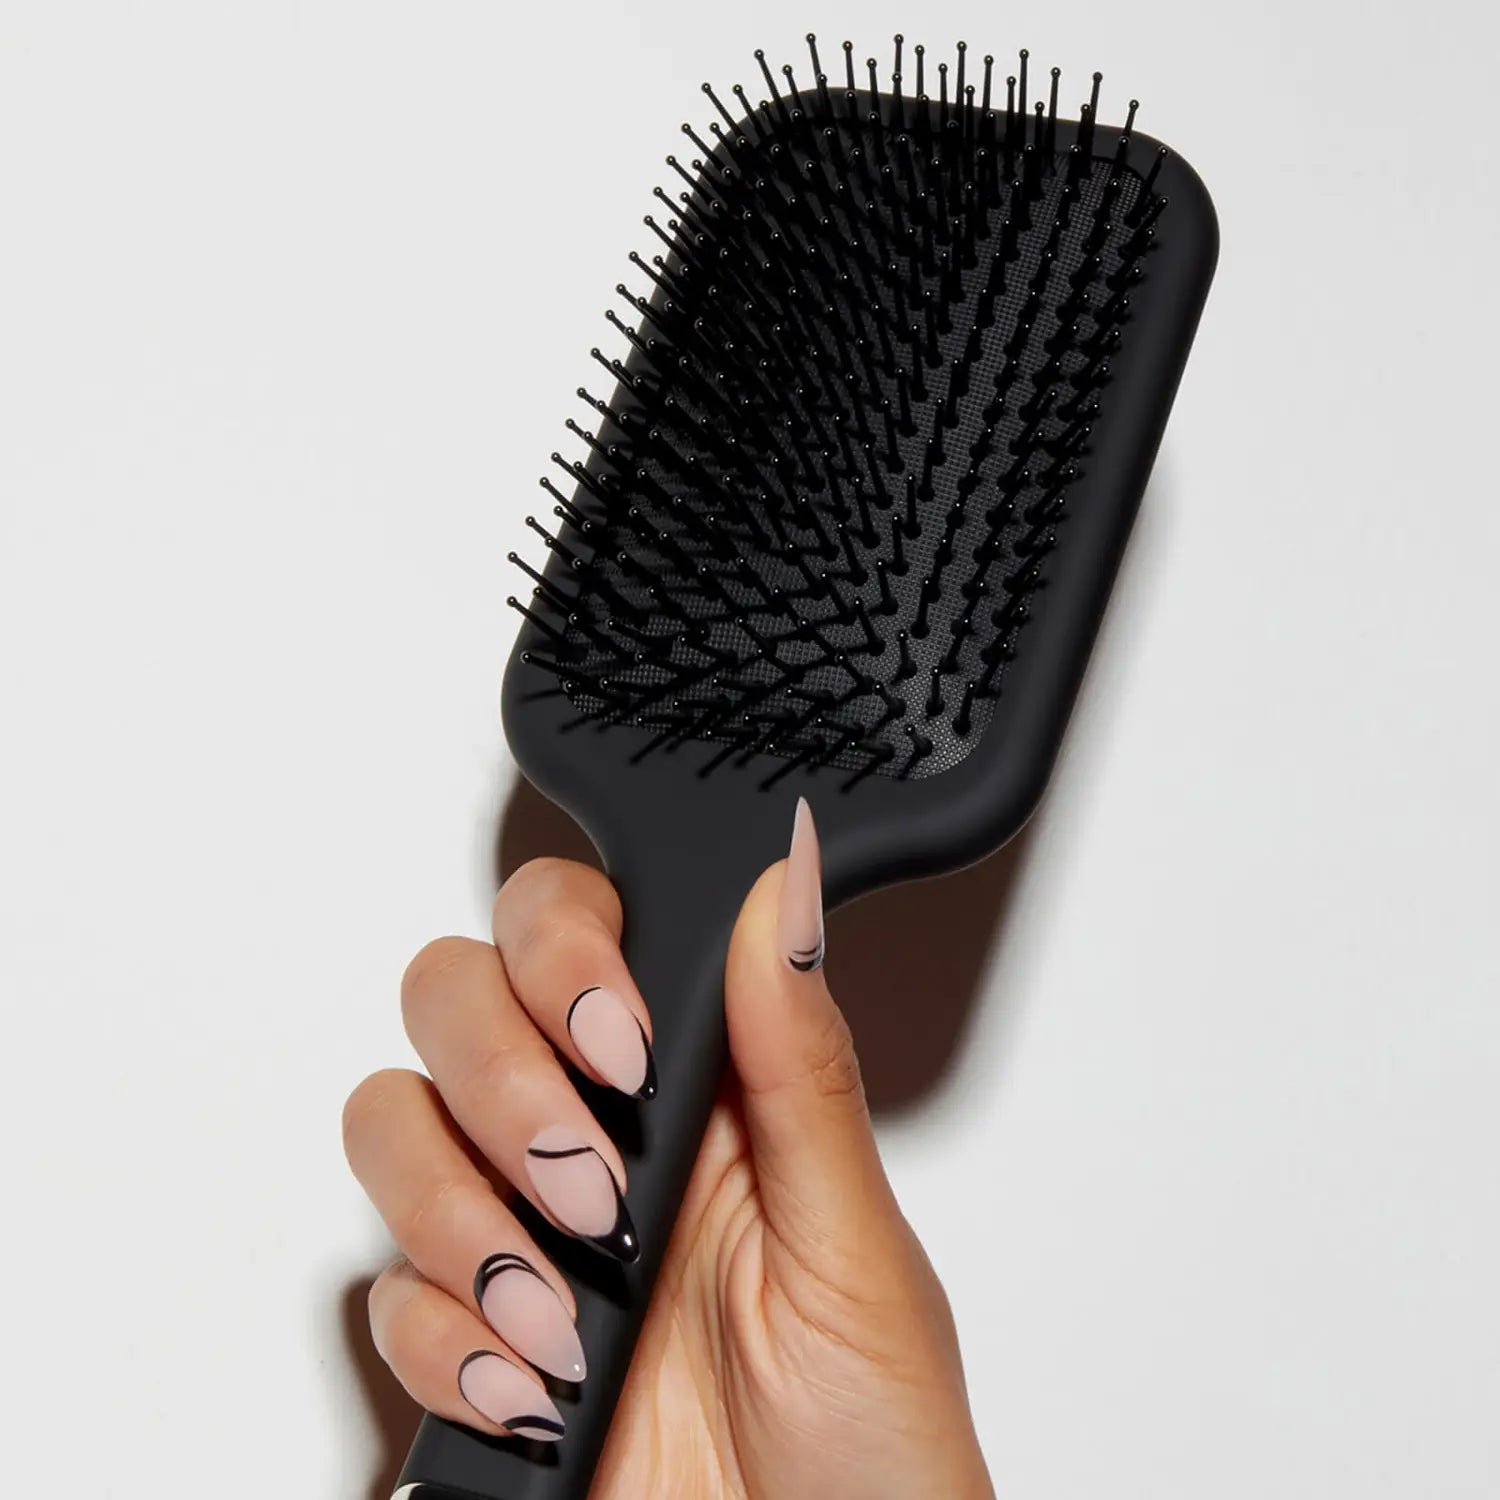 The All-Rounder® - Paddle Brush